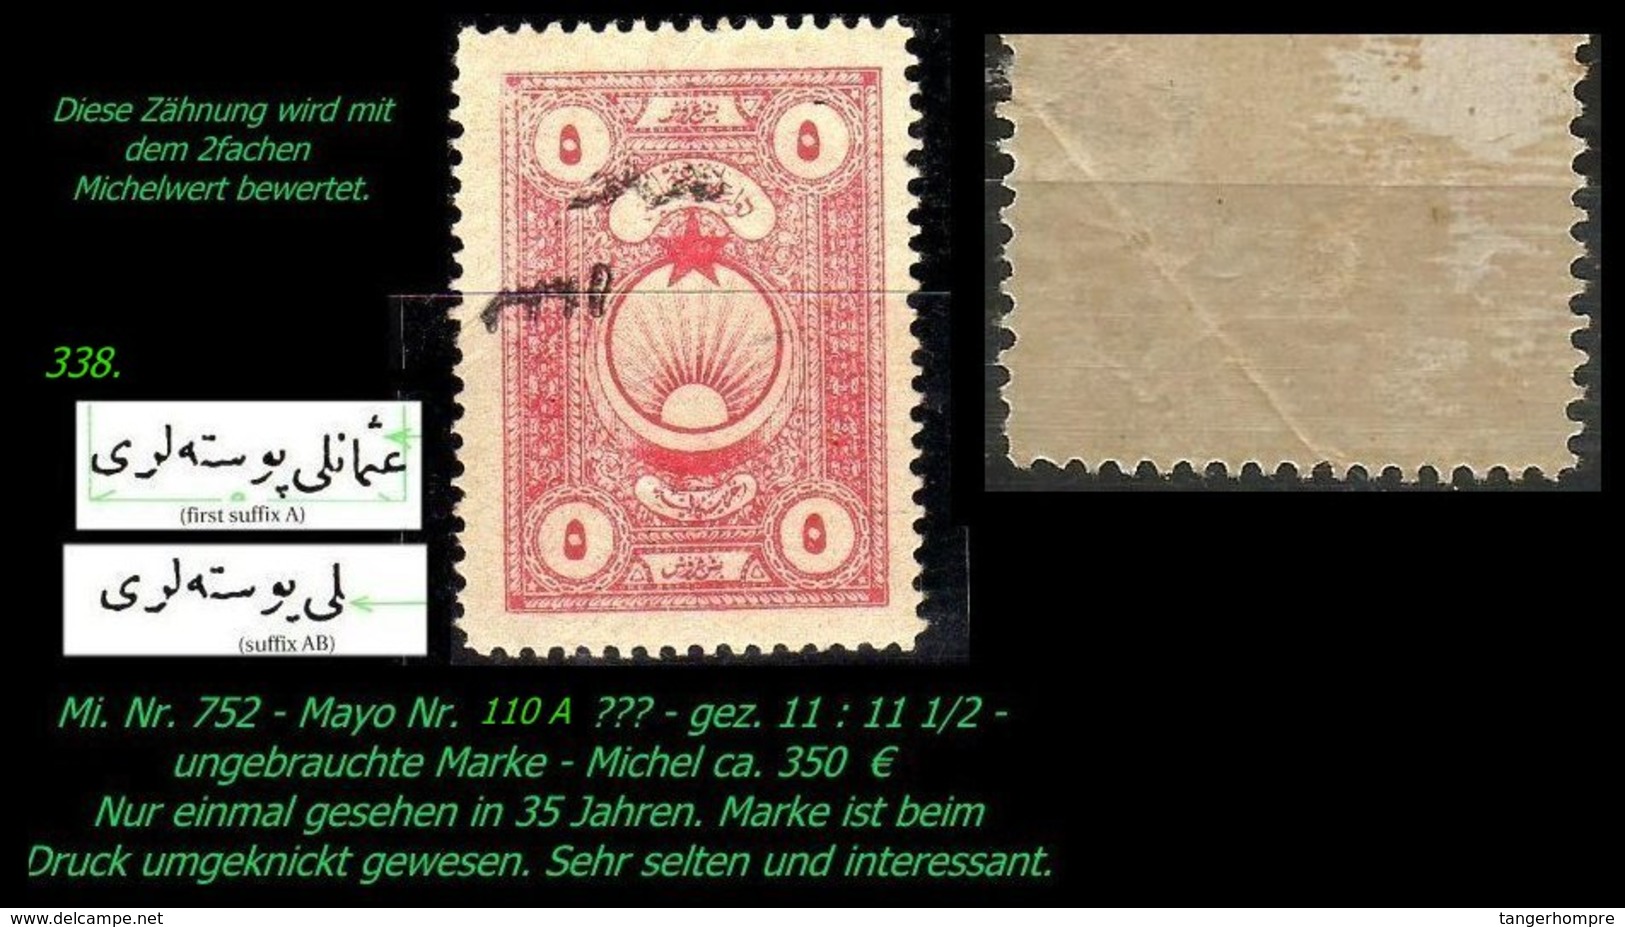 EARLY OTTOMAN SPECIALIZED FOR SPECIALIST, SEE...Mi. Nr. 752 - Mayo 110 A -sehr Seltene Abart -RRR- - 1920-21 Kleinasien